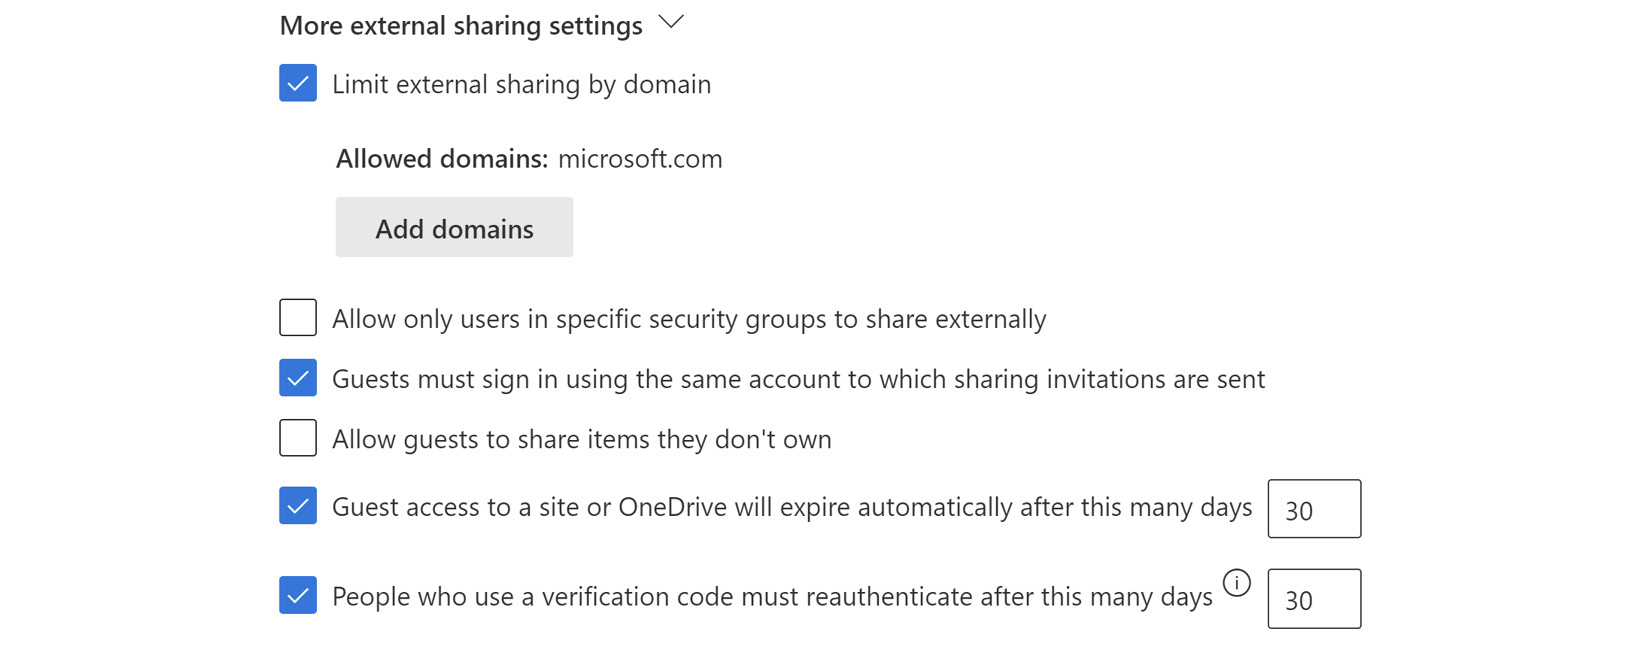 Figure 9.8 – More external sharing settings in the SharePoint admin center
